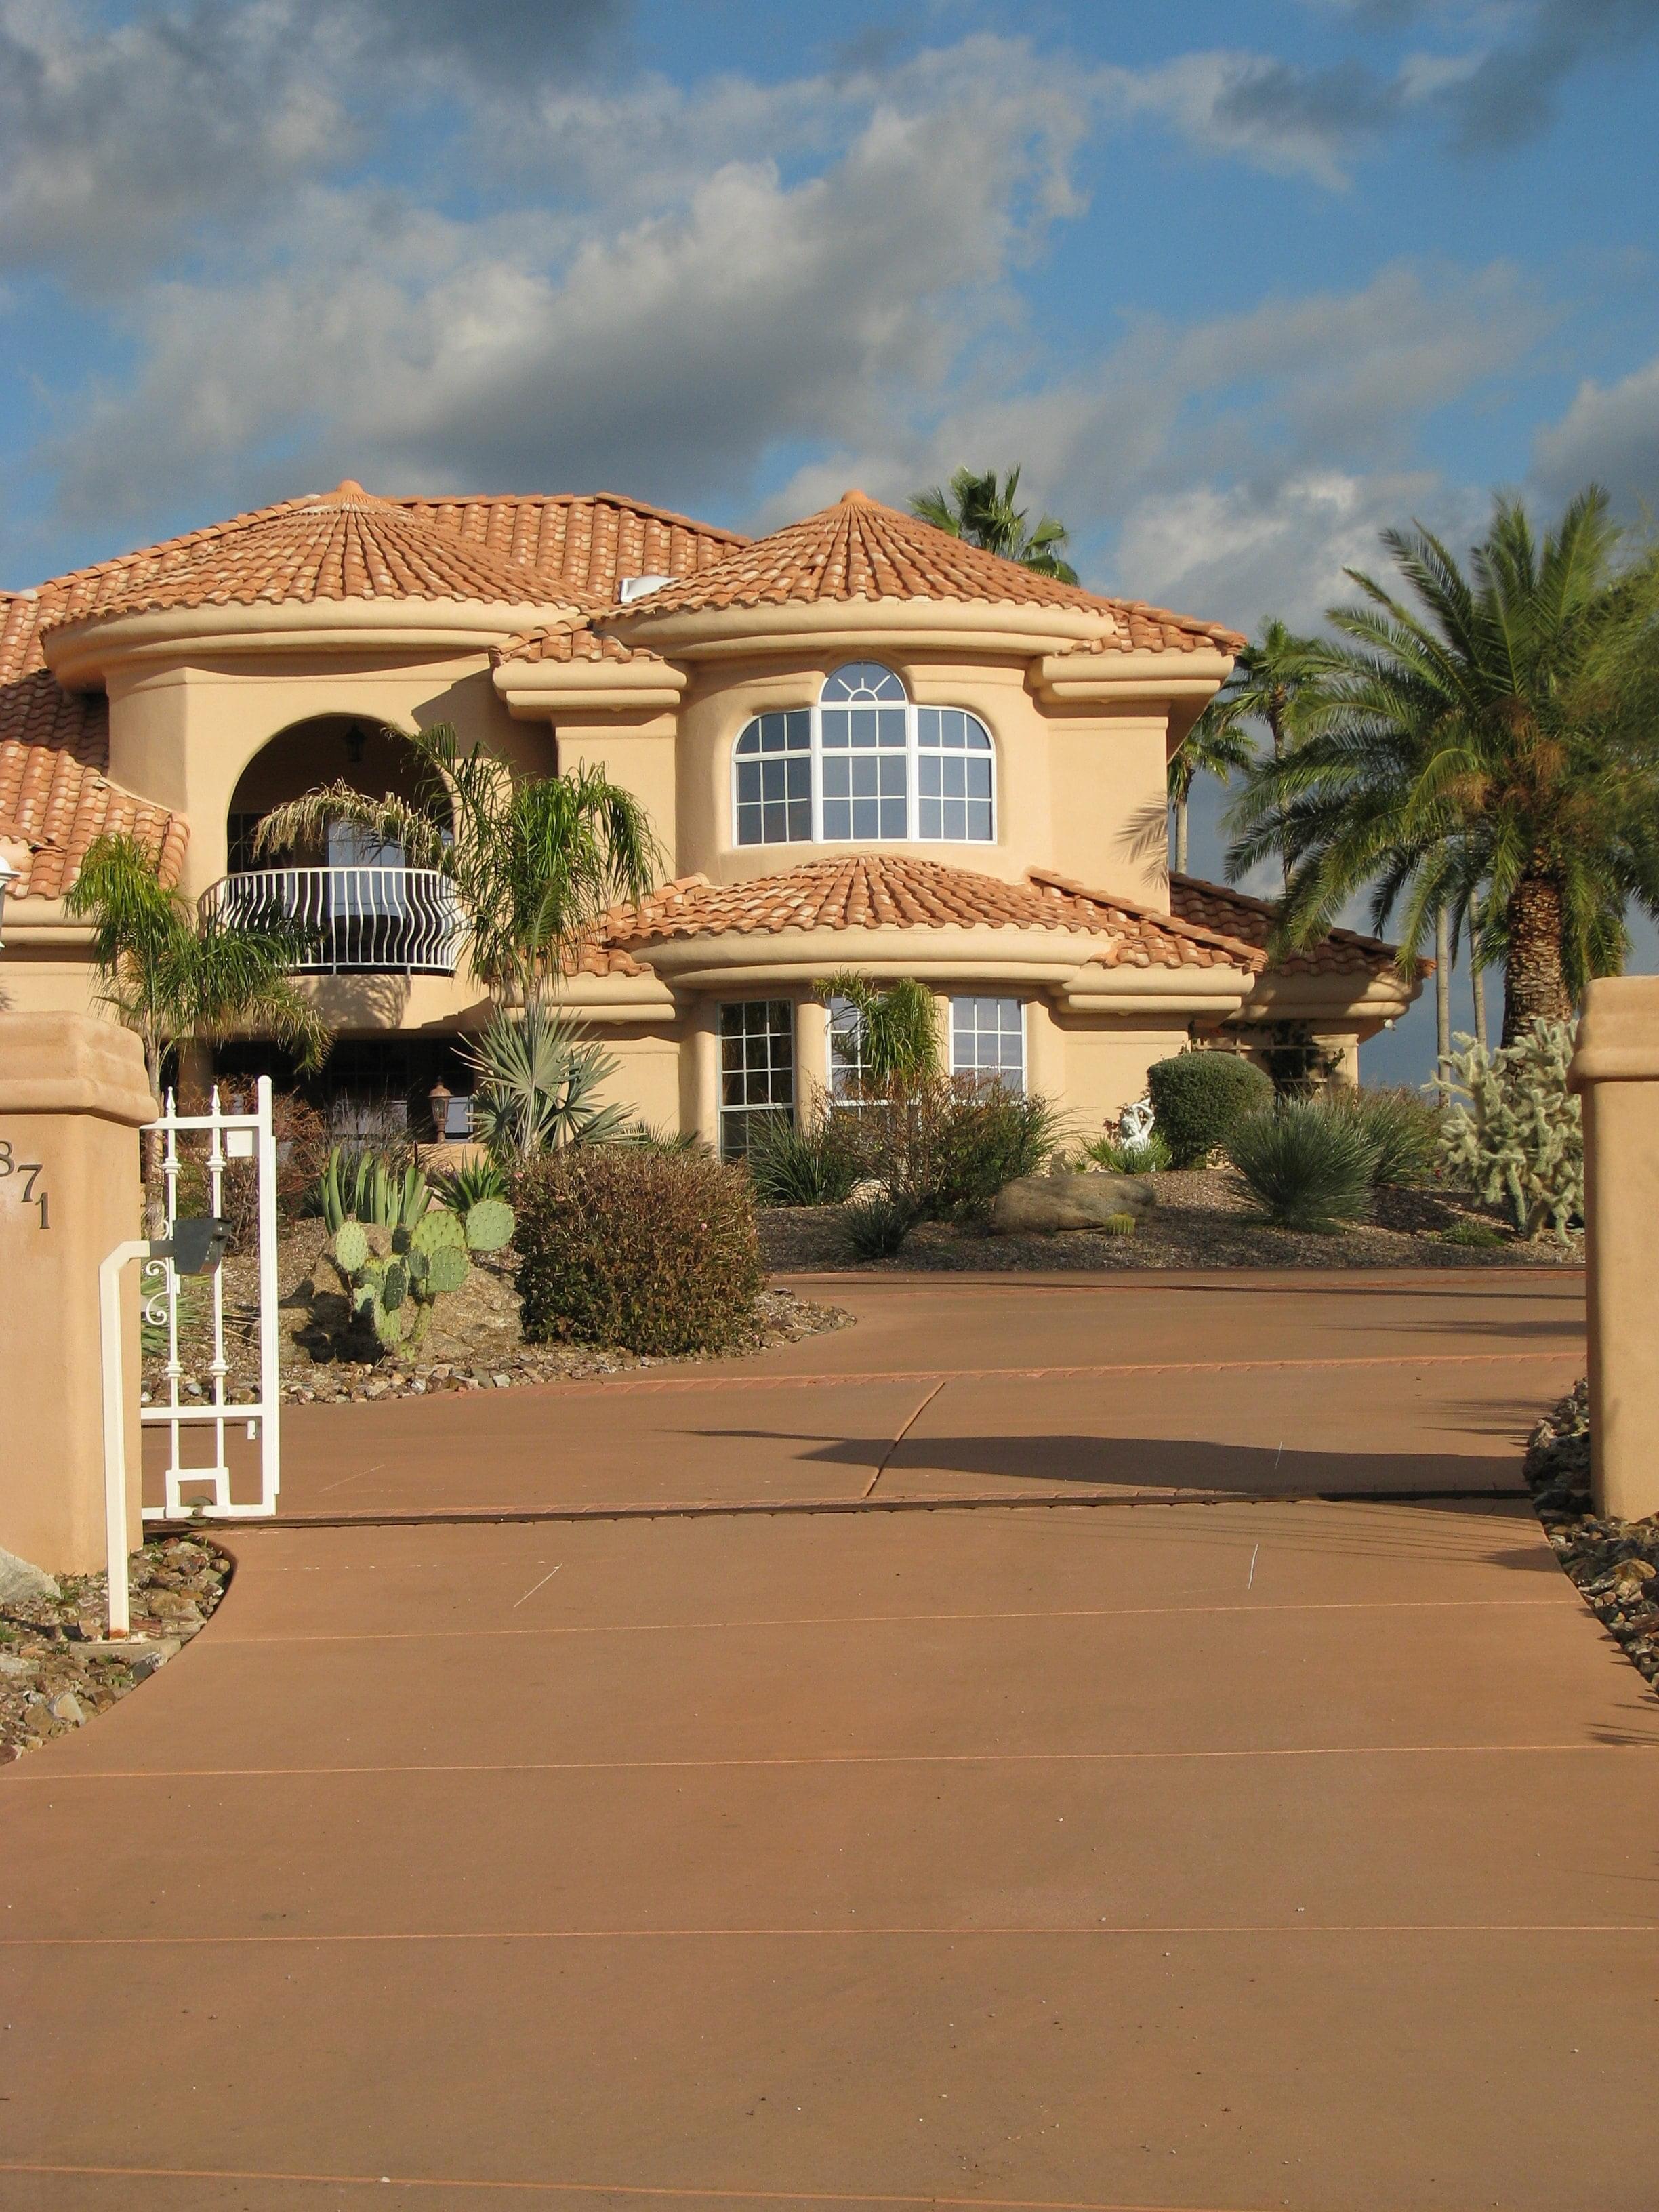 A Tuscan-style home with many palm trees